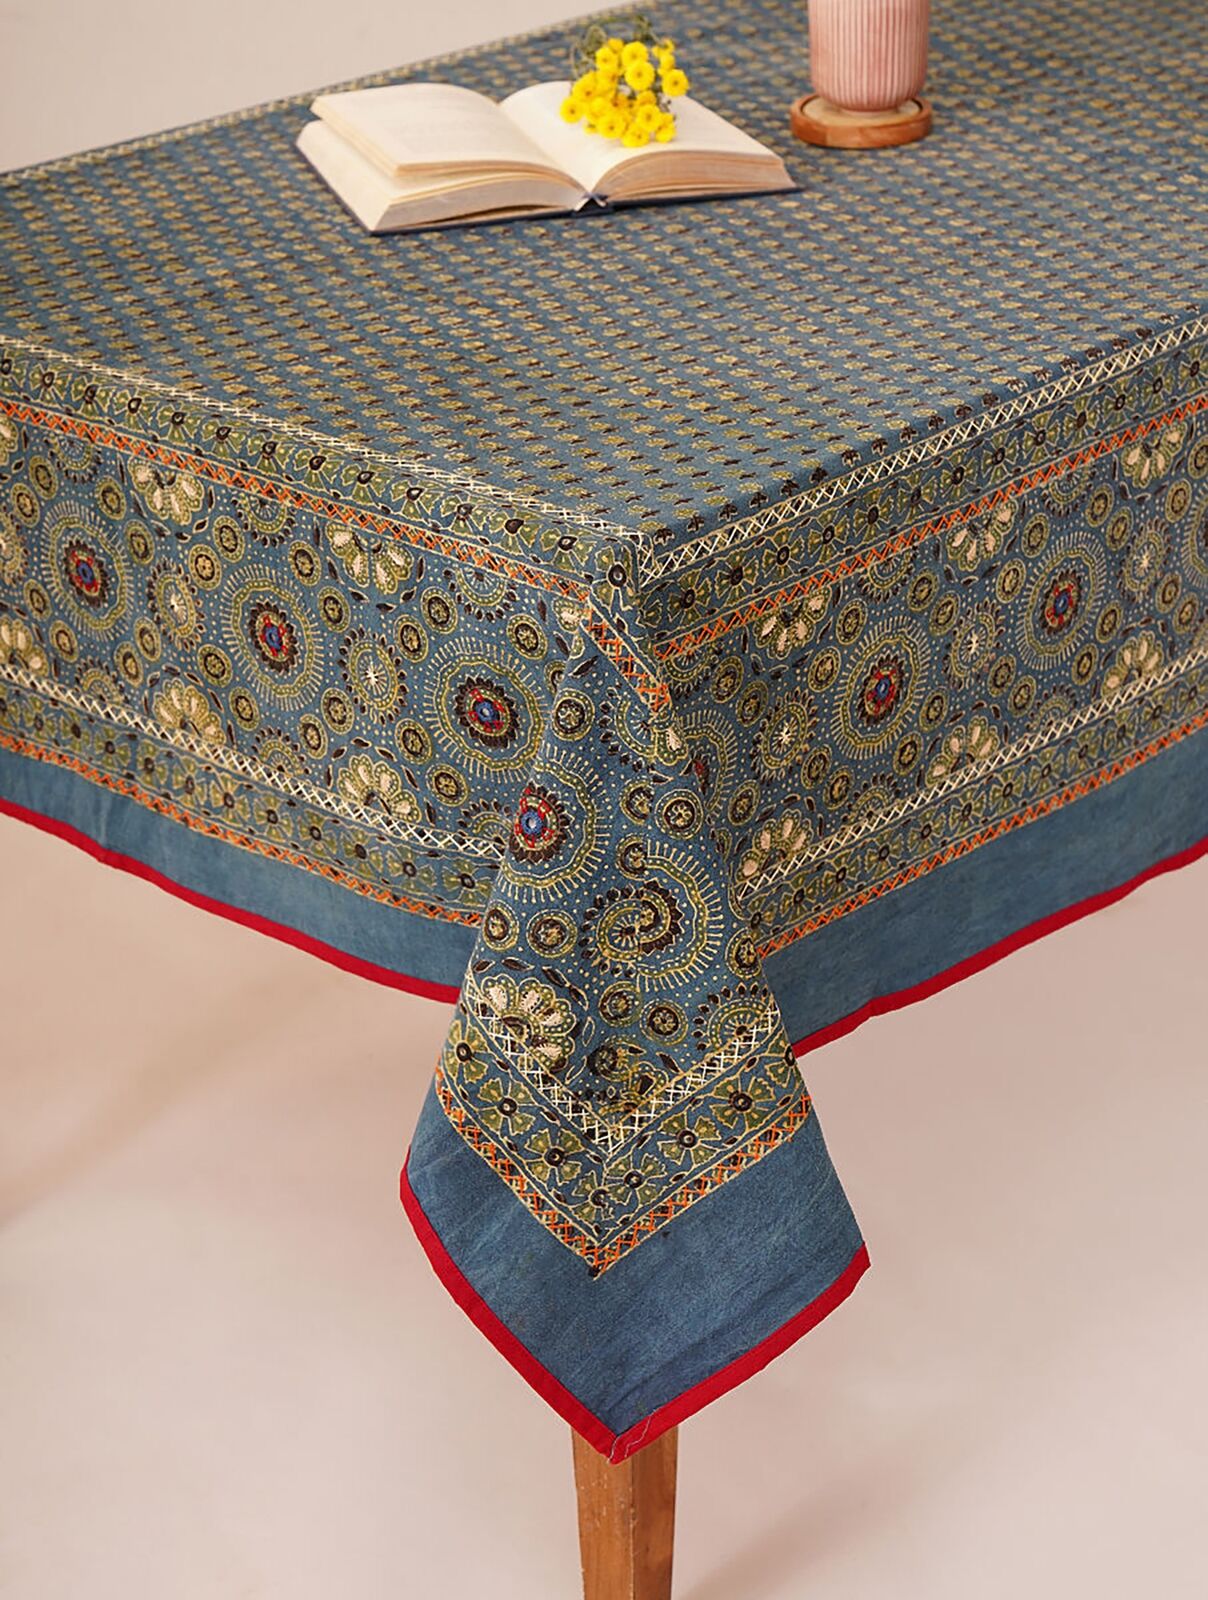 Jaypore Handcrafted Ajrakh Mirrorwork Table Cover